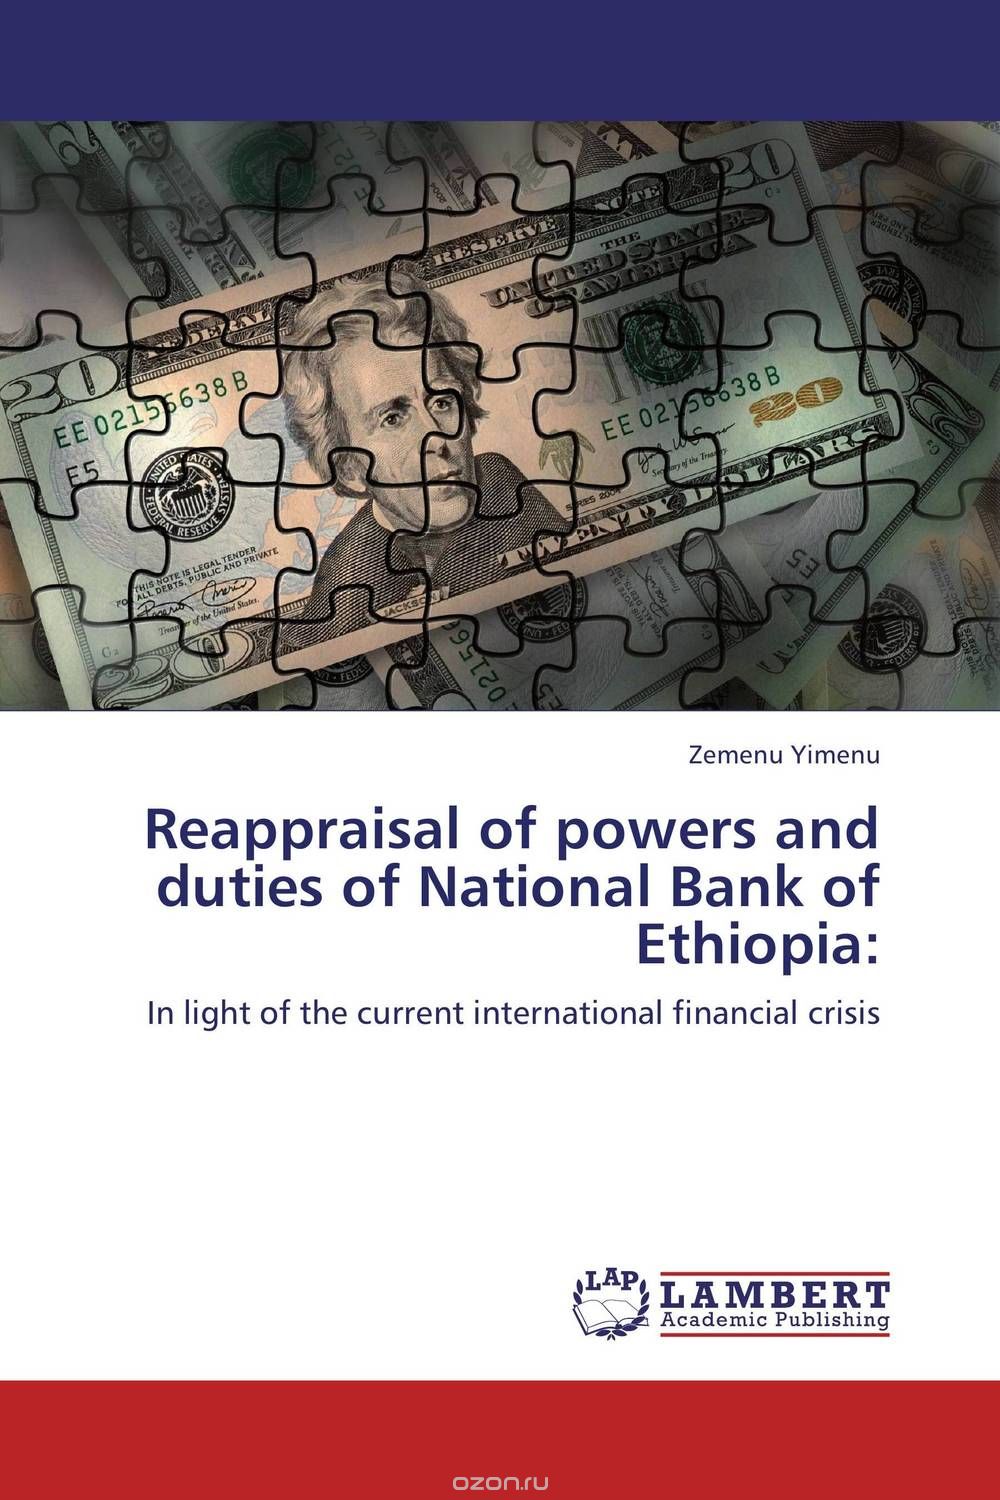 Reappraisal of powers and duties of National Bank of Ethiopia: